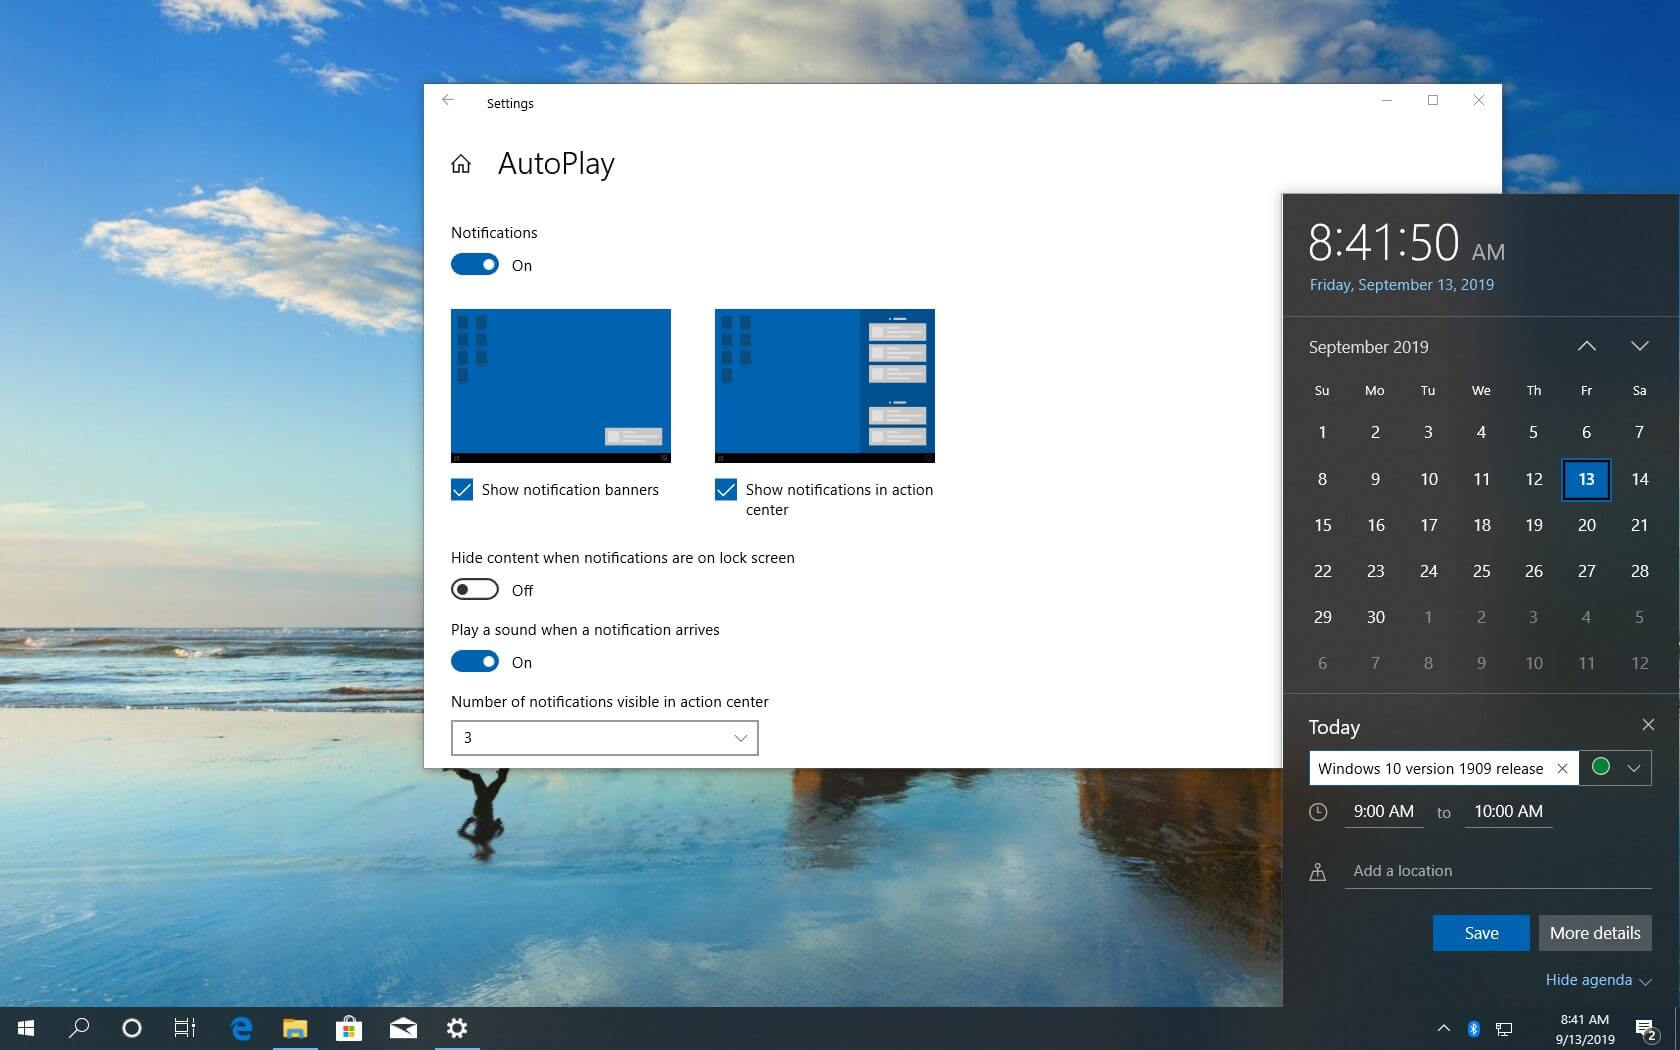 Feature Update To Windows 10, Version 1909